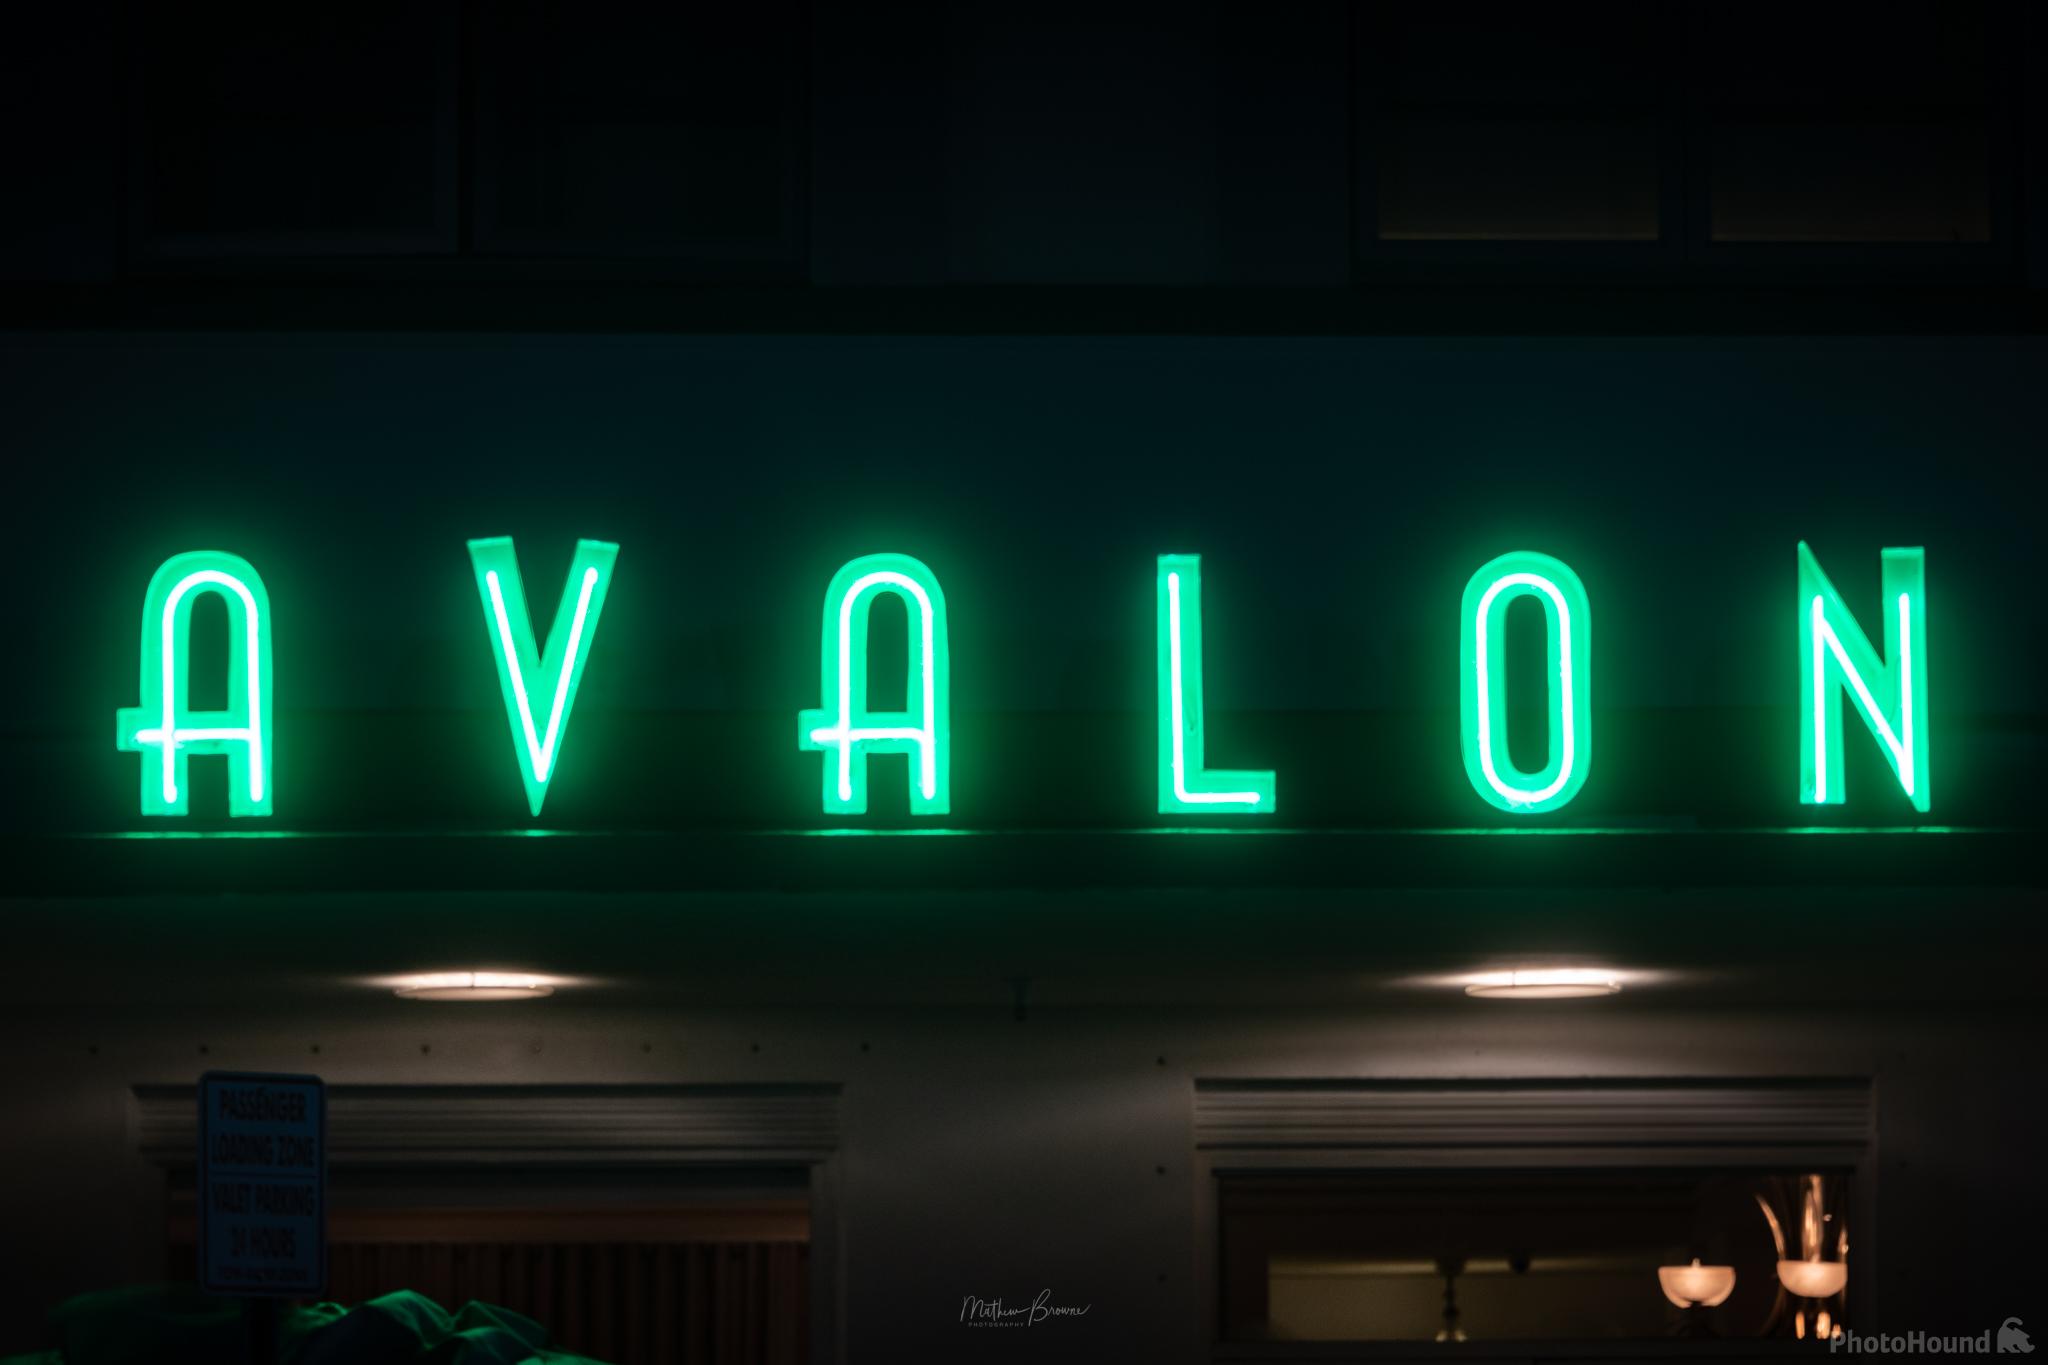 Image of Avalon Hotel by Mathew Browne